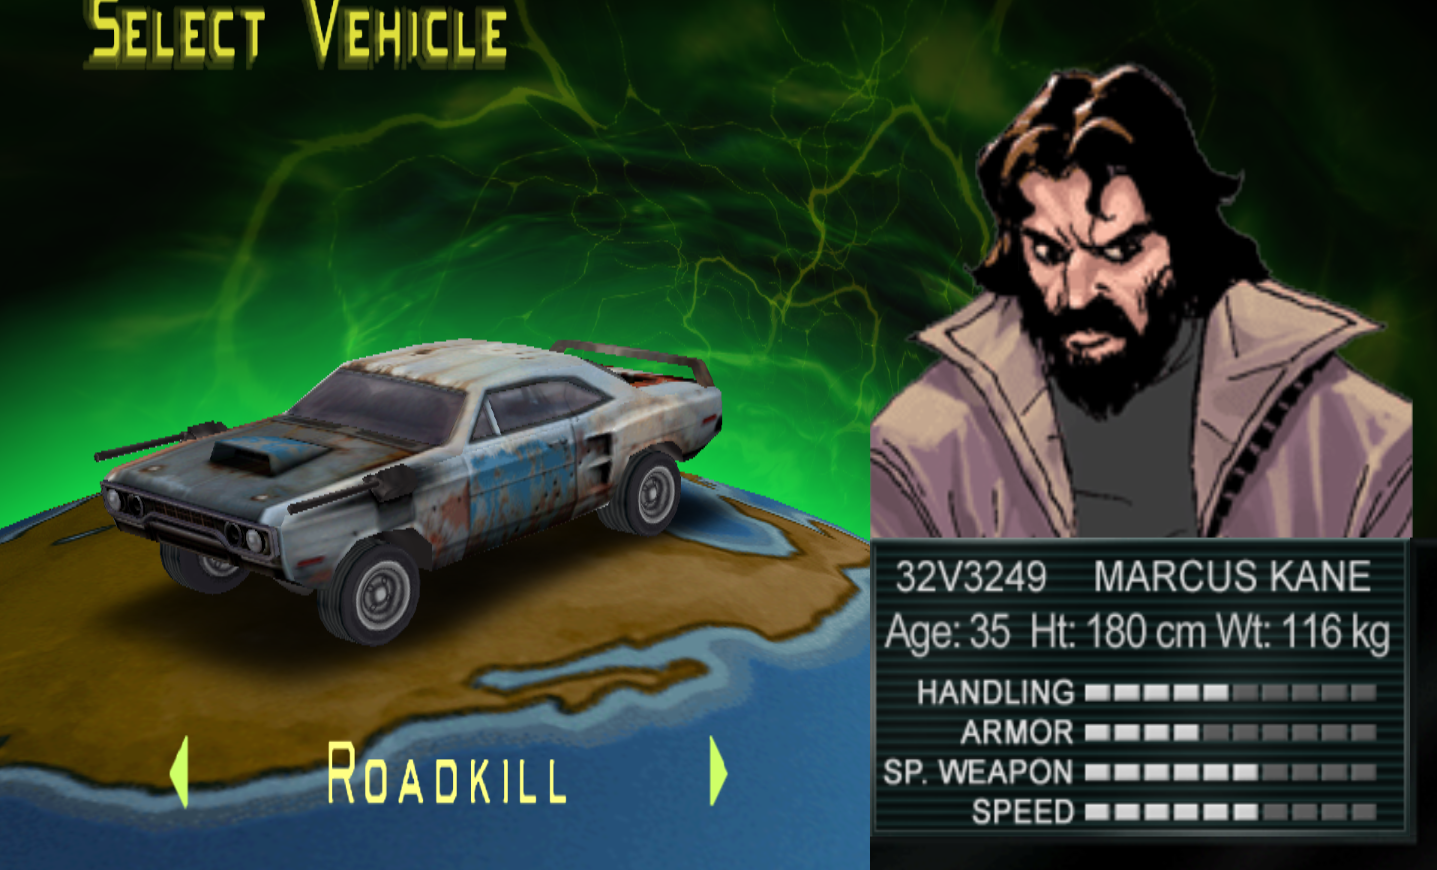 Roadkill - Twisted Metal Guide - IGN